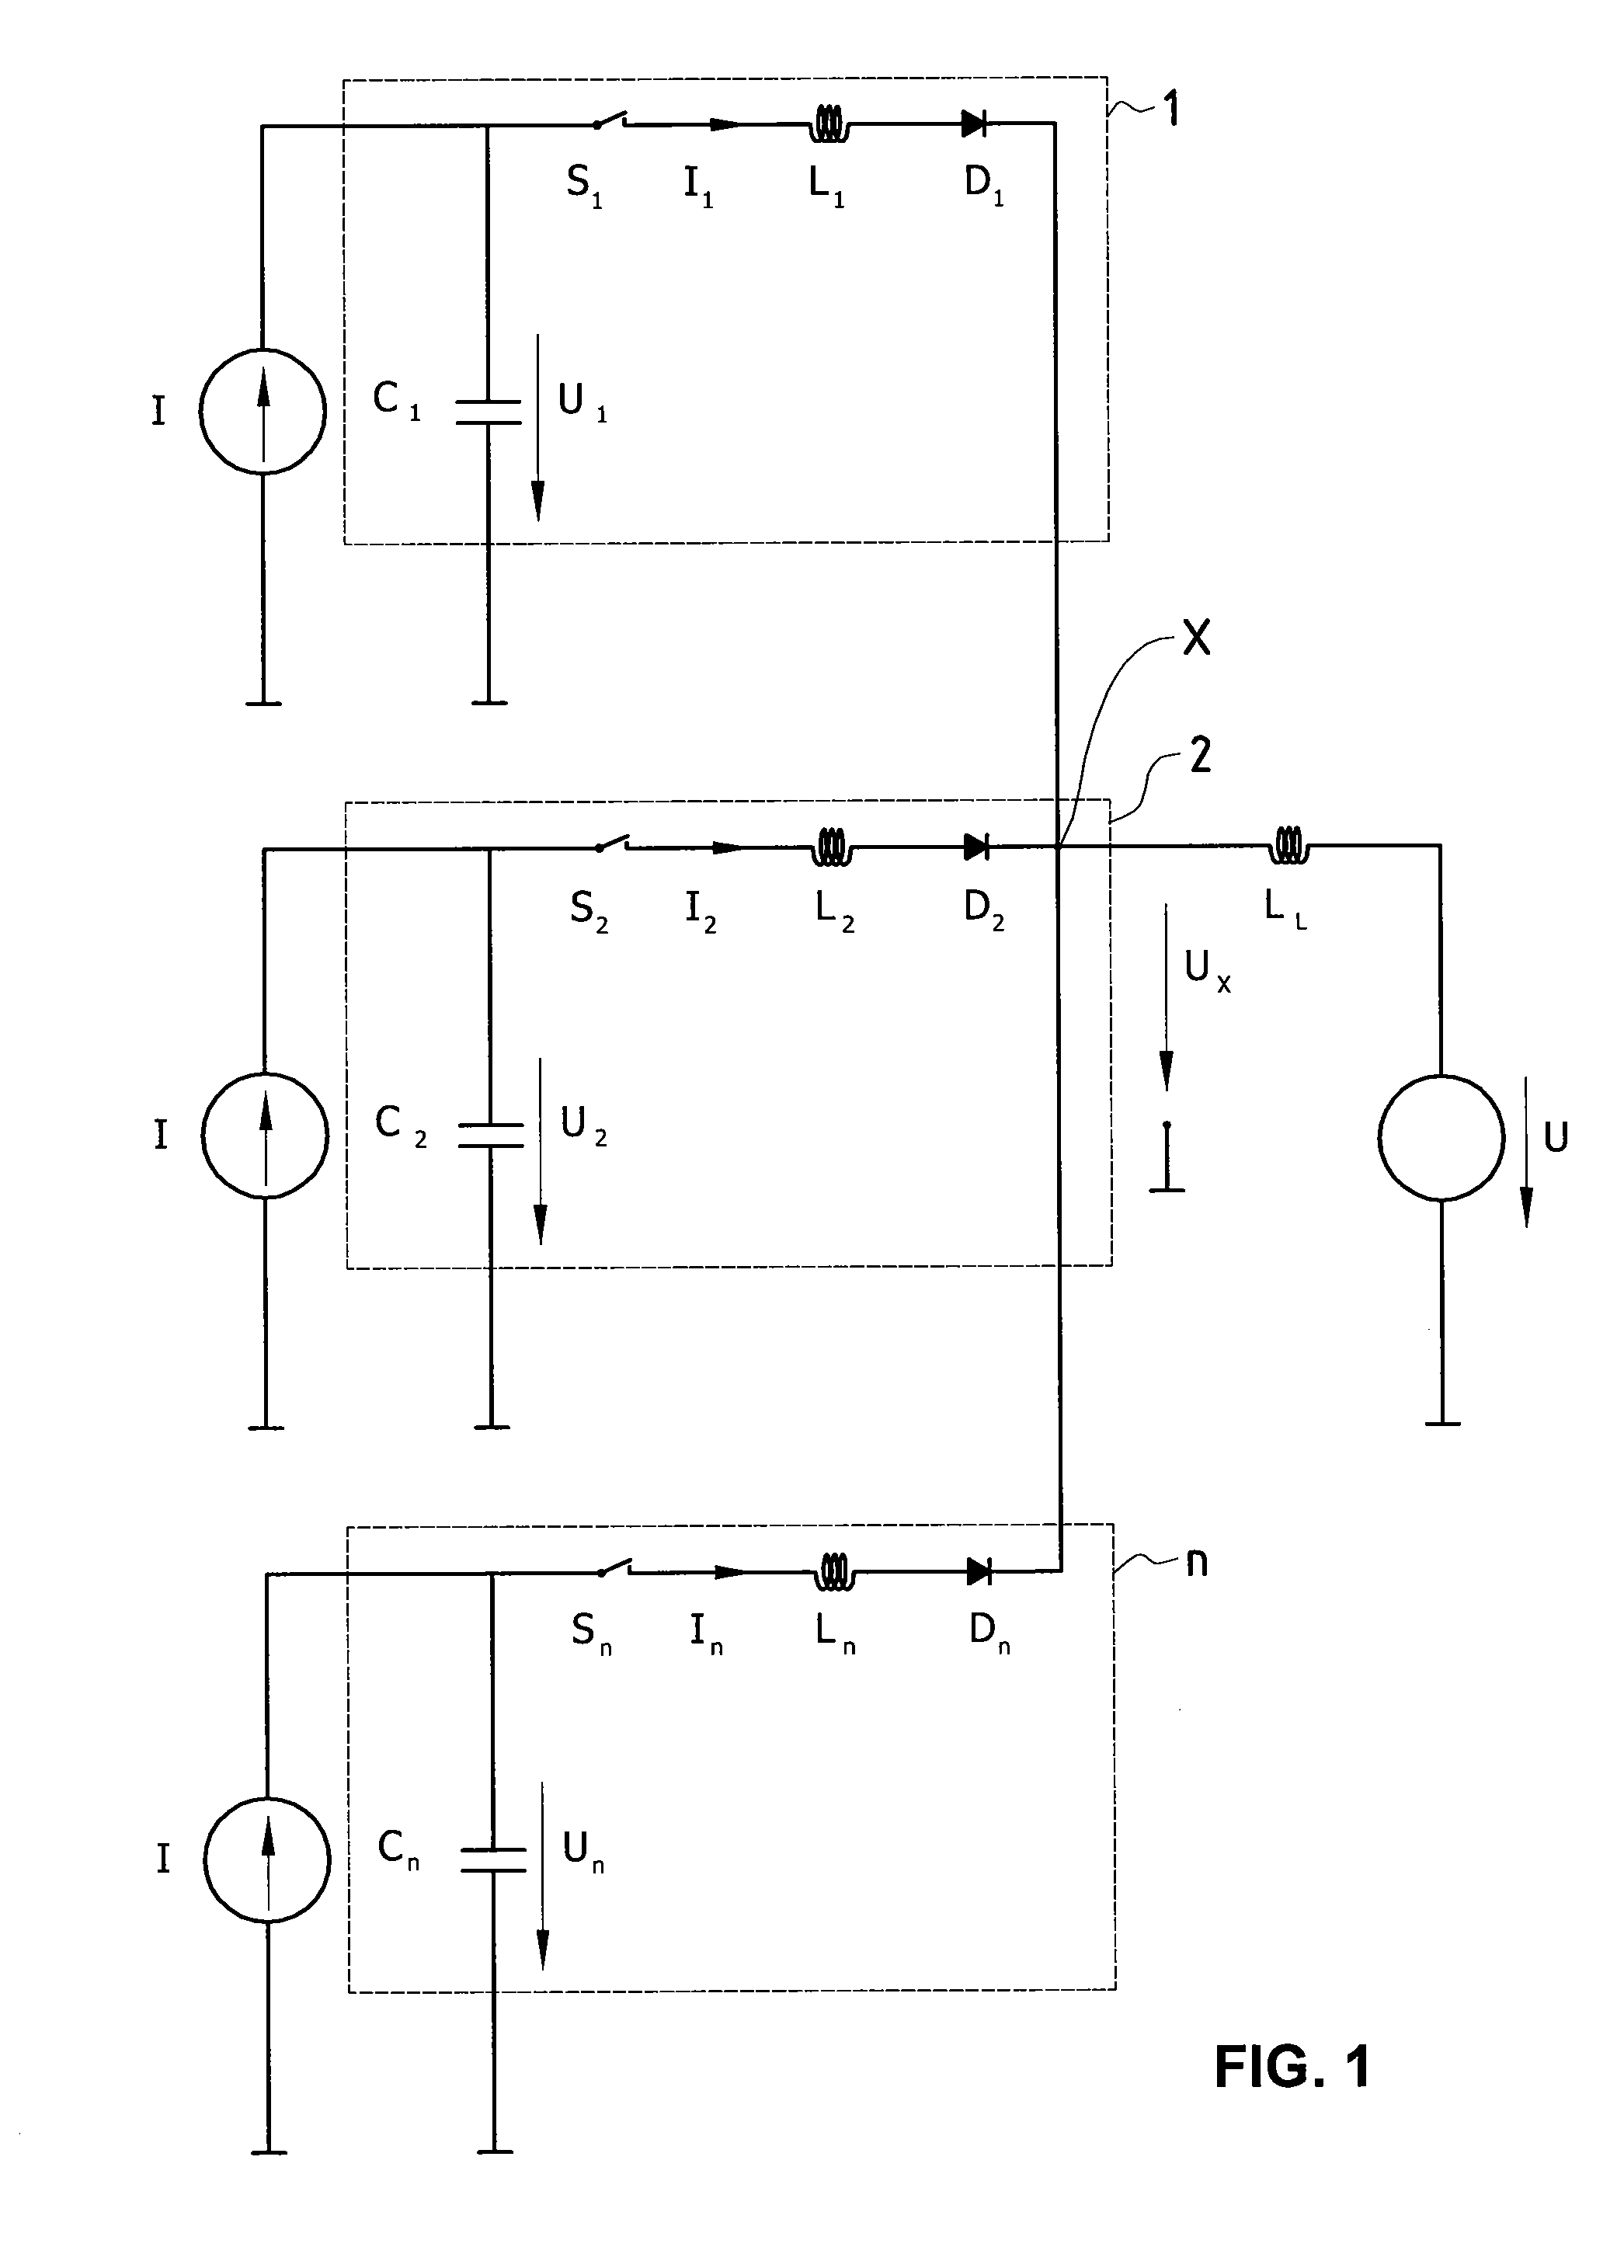 Multiphase soft-switched dc-dc converter